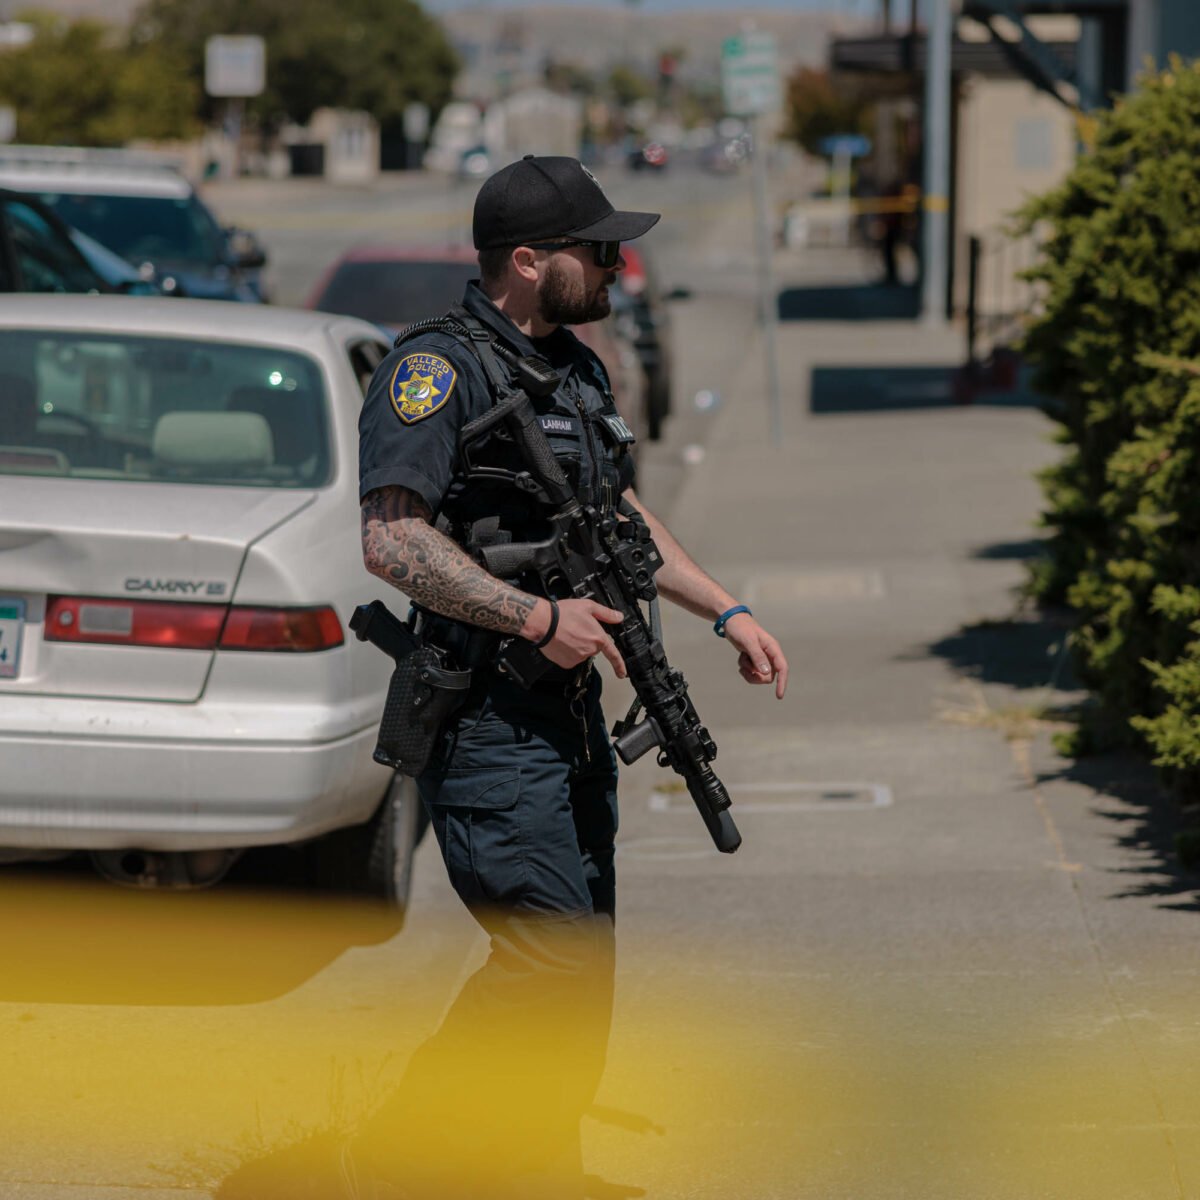 In pictures: Vallejo police search for gunman after shooting near headquarters